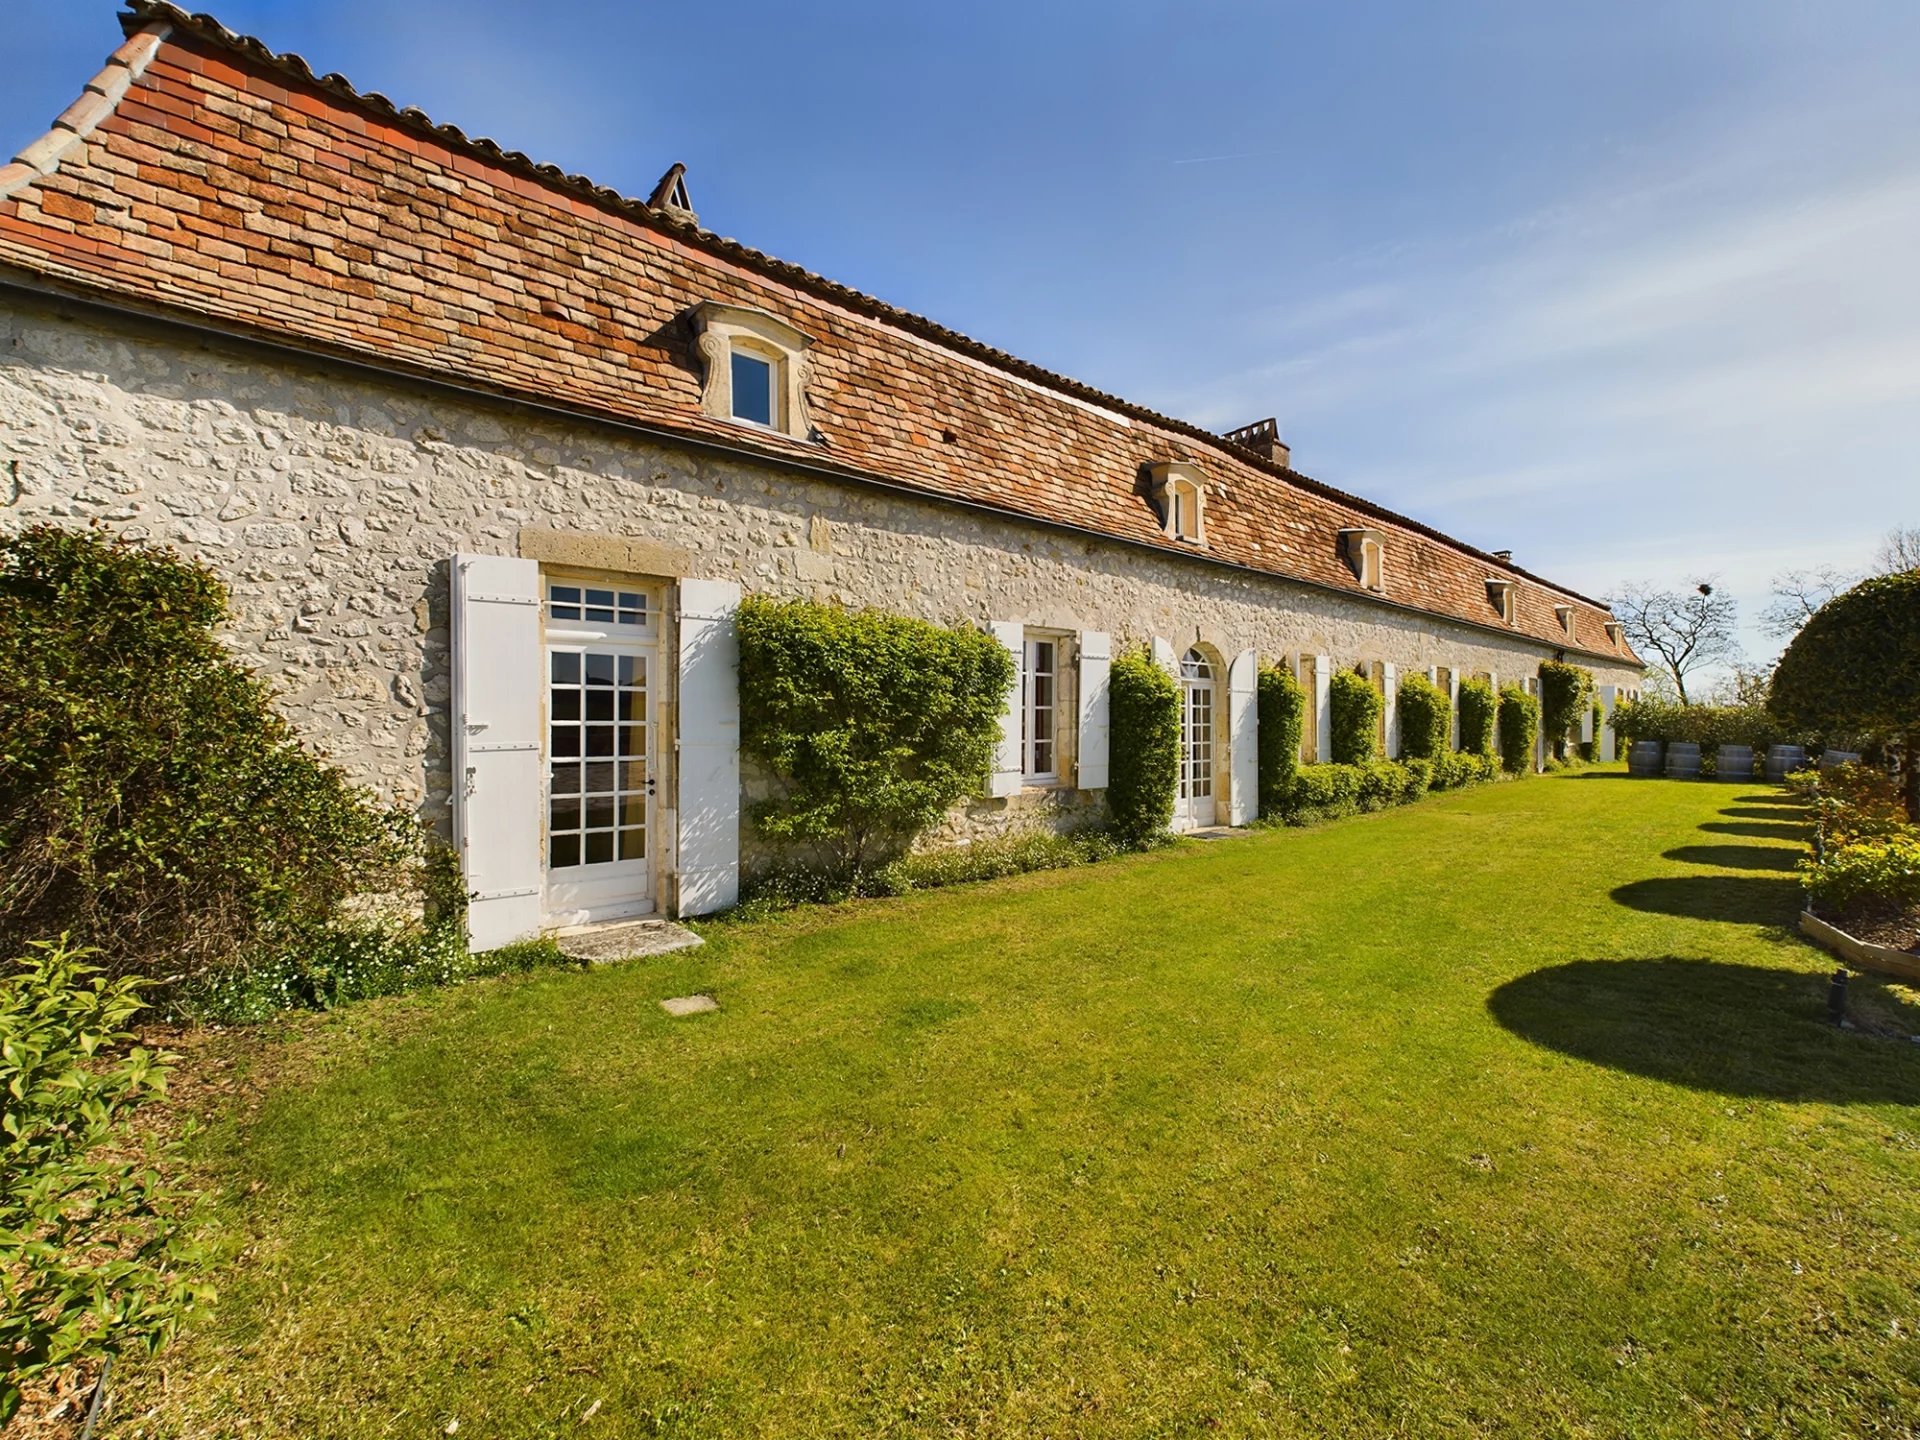 Beautifully restored Manor house with 11 hectares of land between Bordeaux and Bergerac